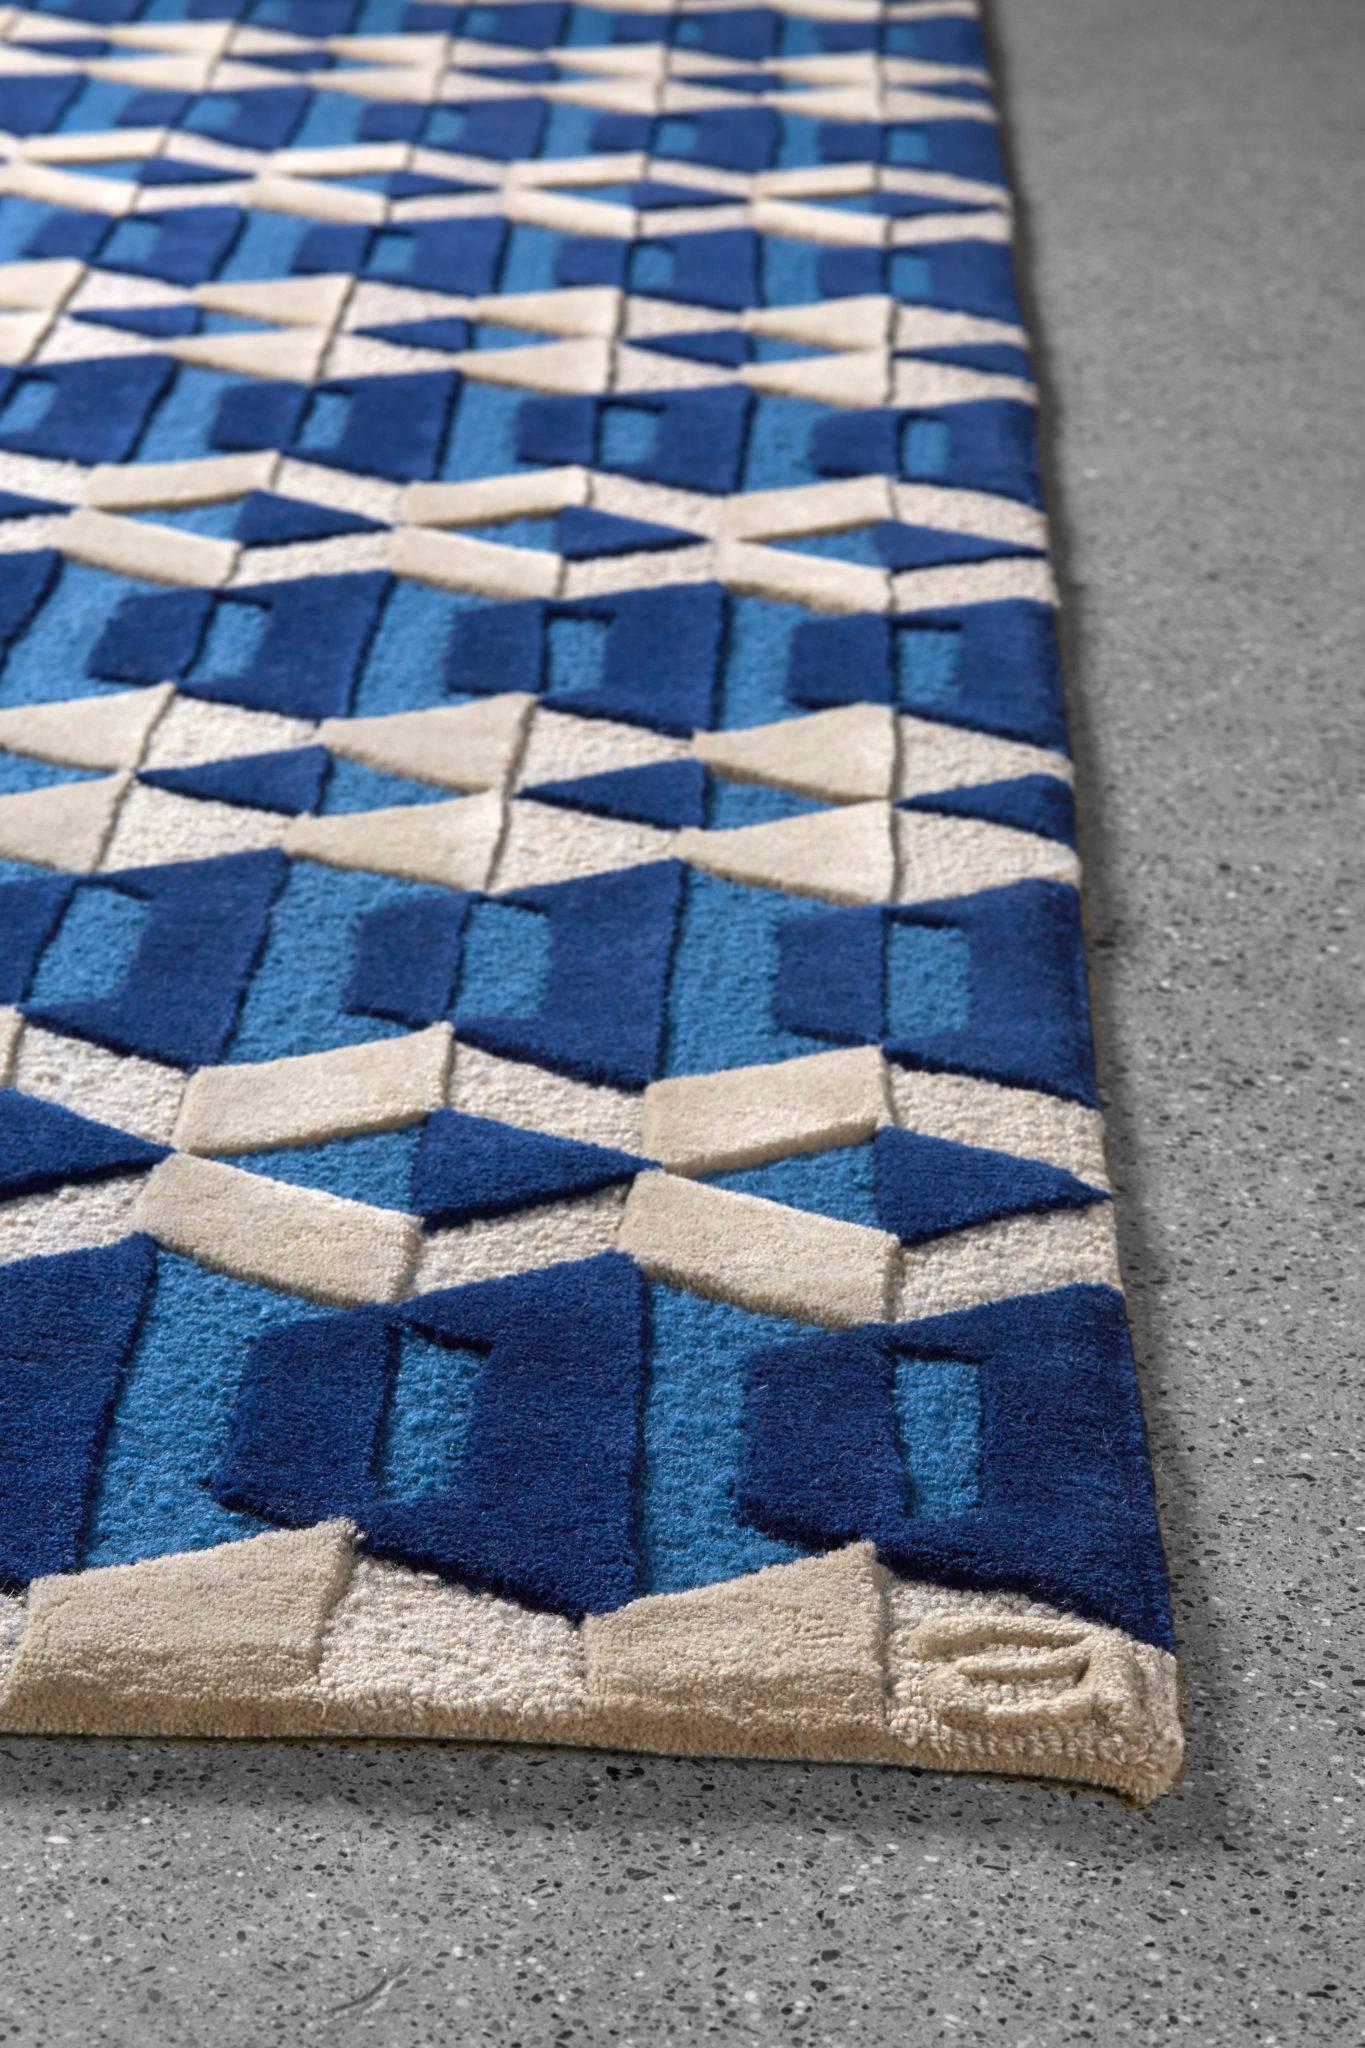 Inspired by traditional Swedish textiles and Craft; the Garbo/Sapphire area rug by Angela Adams features simple geometric shapes and fine, meticulous craftsmanship. The Garbo design blends order and geometry with rich texture and color in Sapphire,